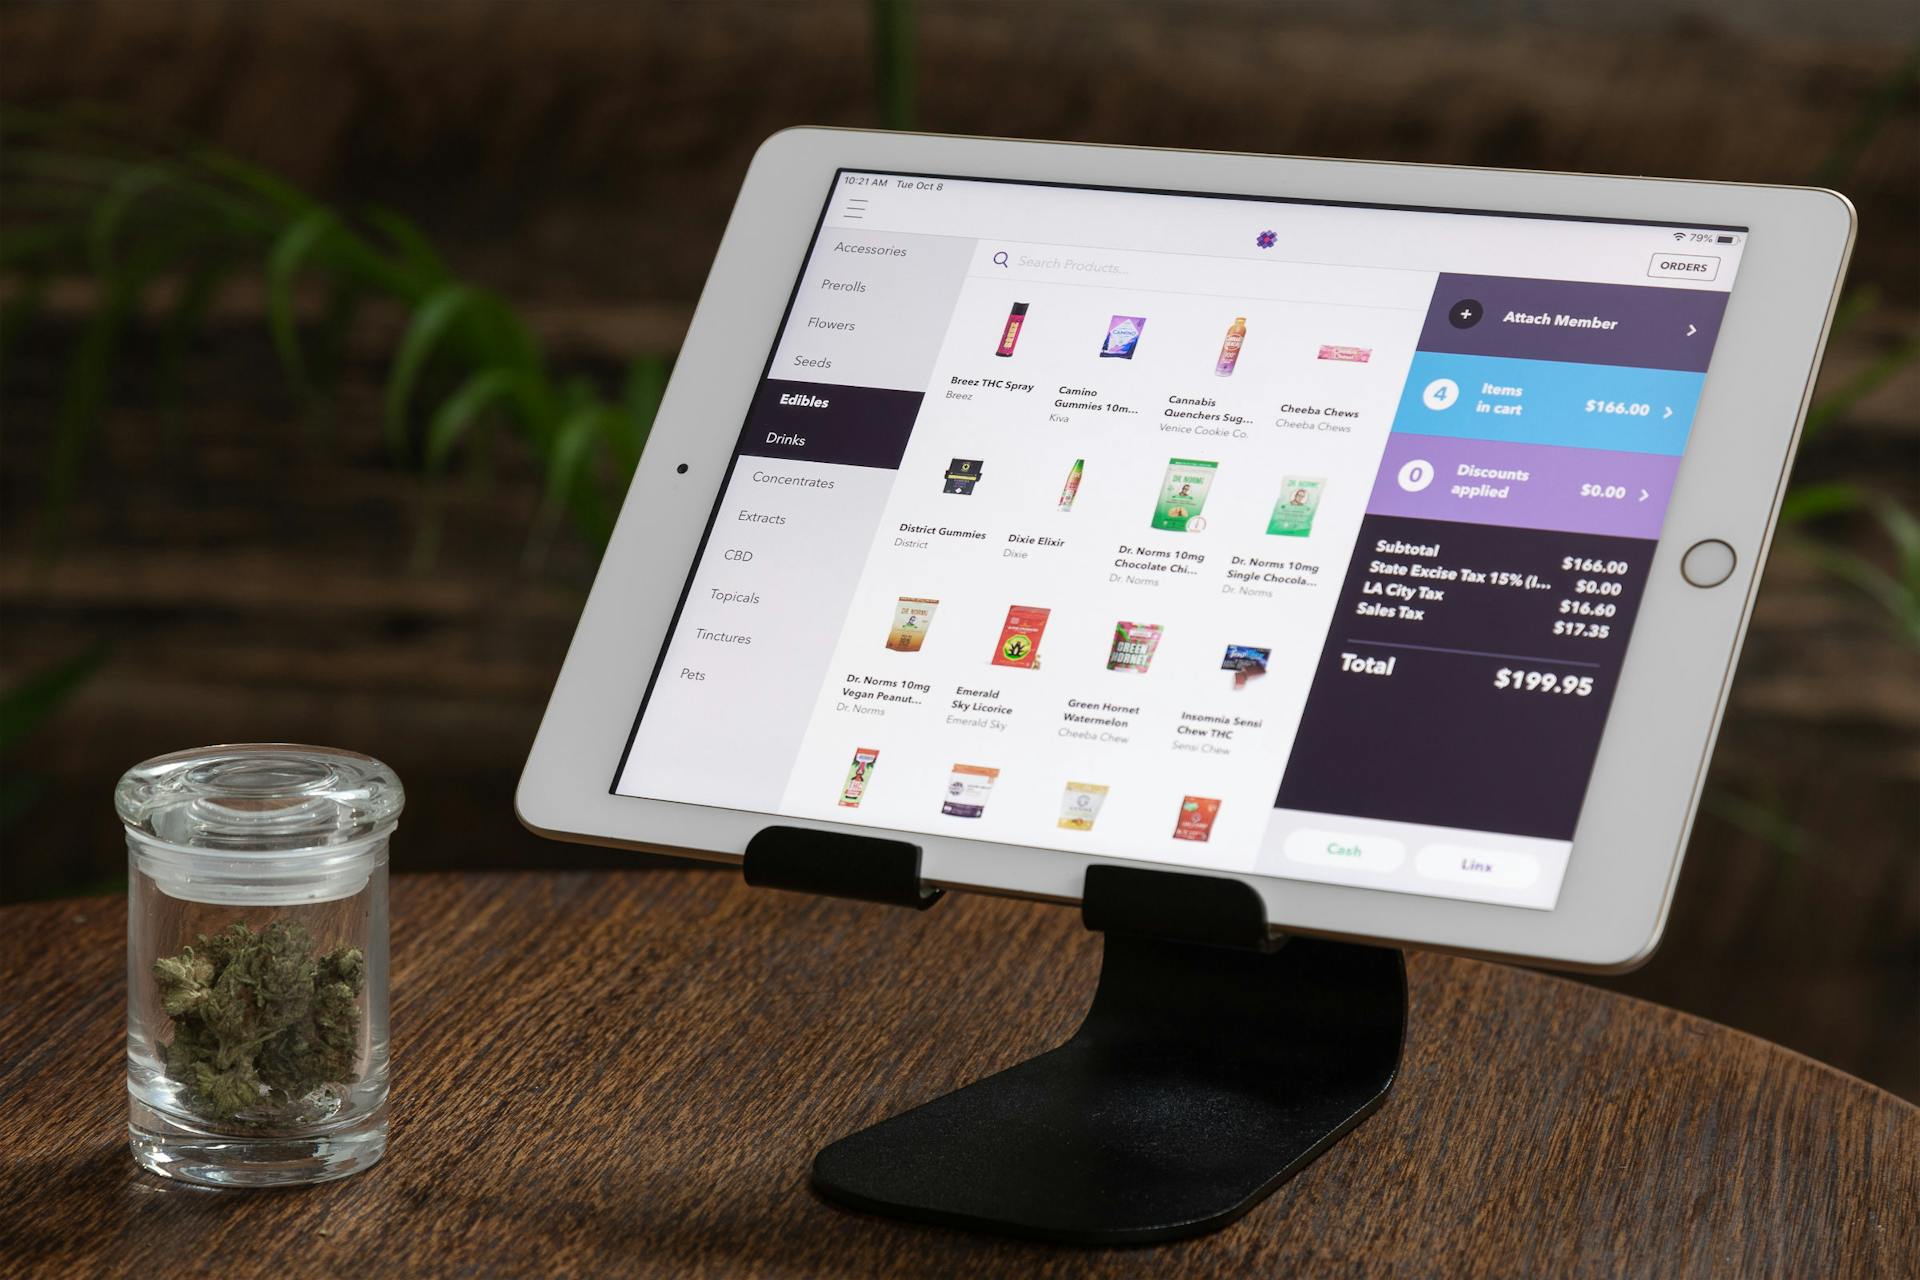 An iPad display shows the Meadow cannabis POS system